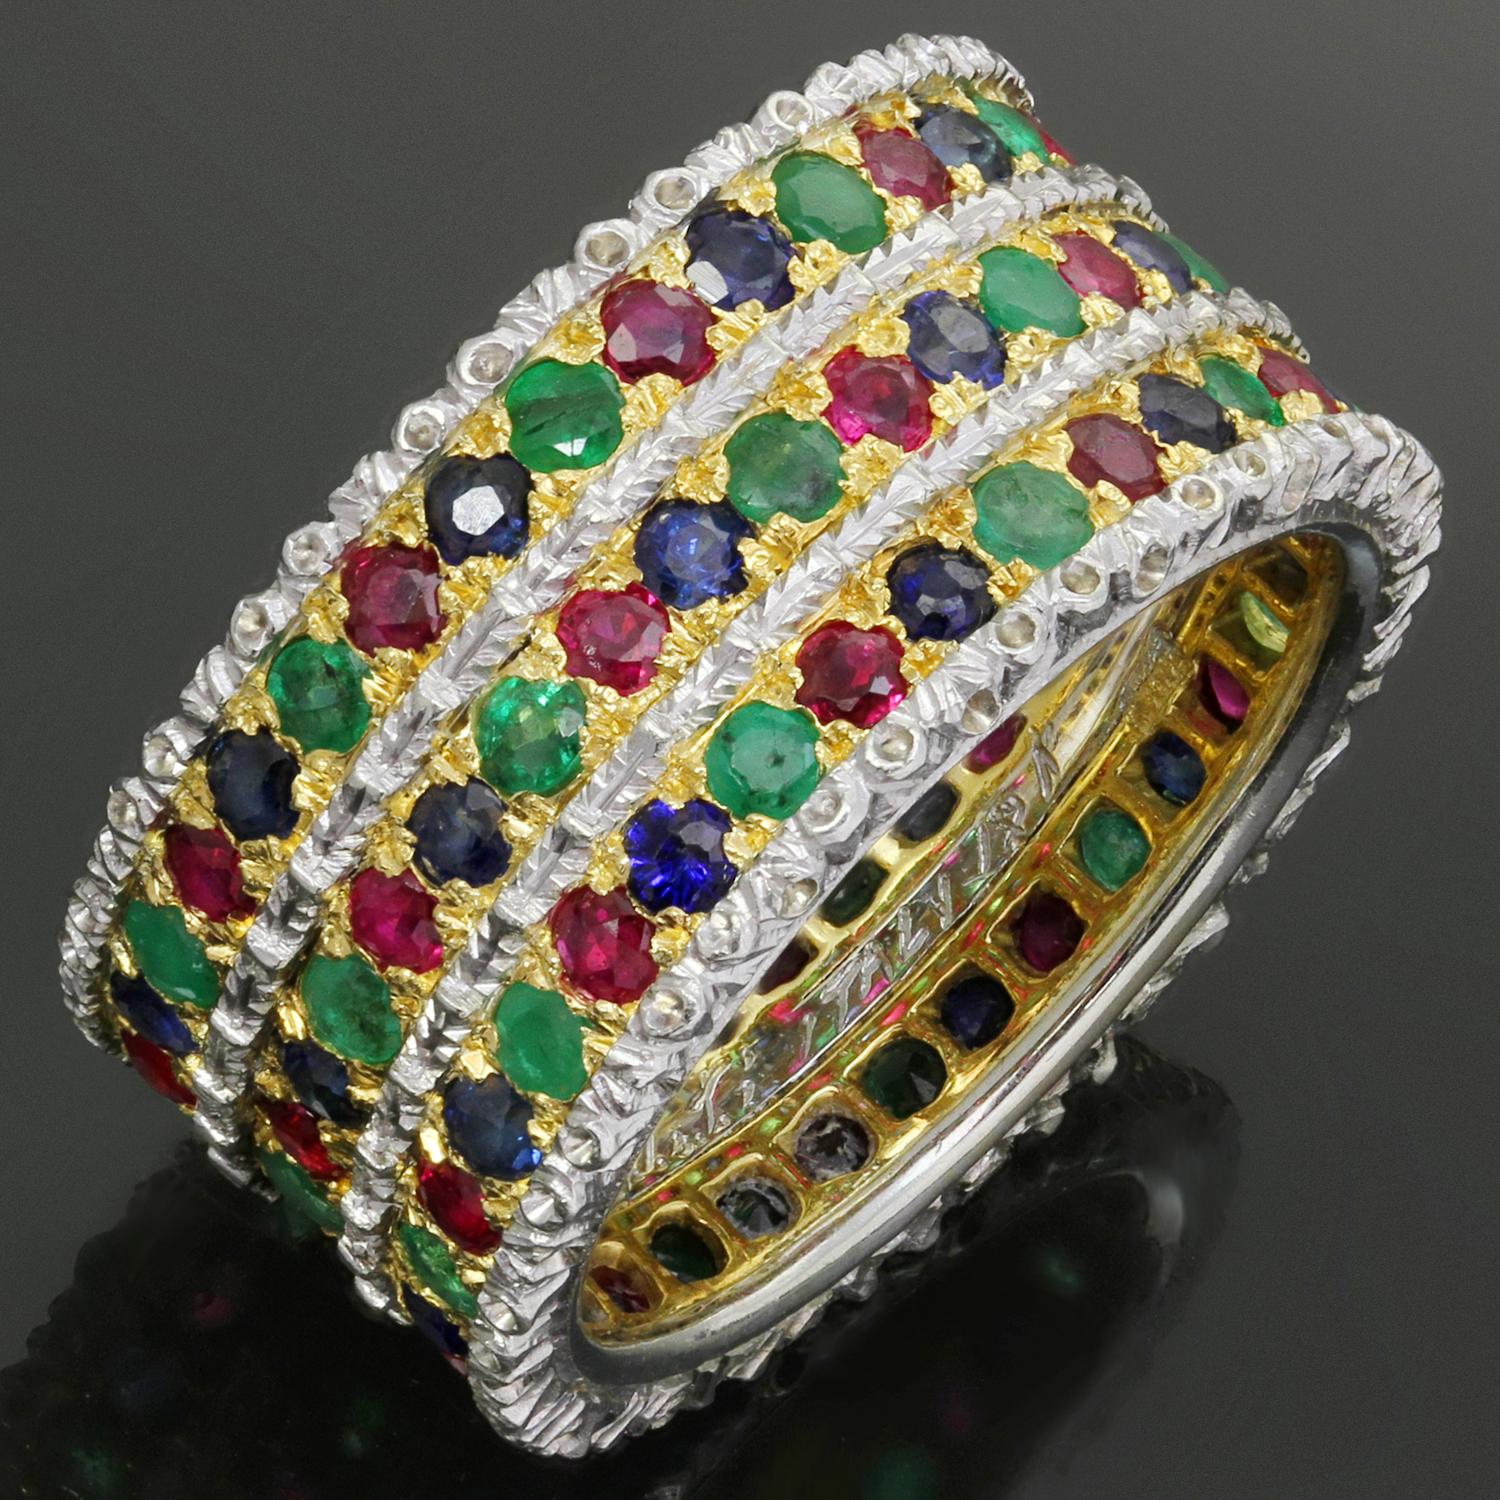 This gorgeous Ganmario Buccellati wide eternity band is crafted in 18k white & yellow gold and features 3 colorful rows set with old-mine cut round red rubies and blue and green sapphires. Made in Italy circa 1980s. Measurements: 0.38